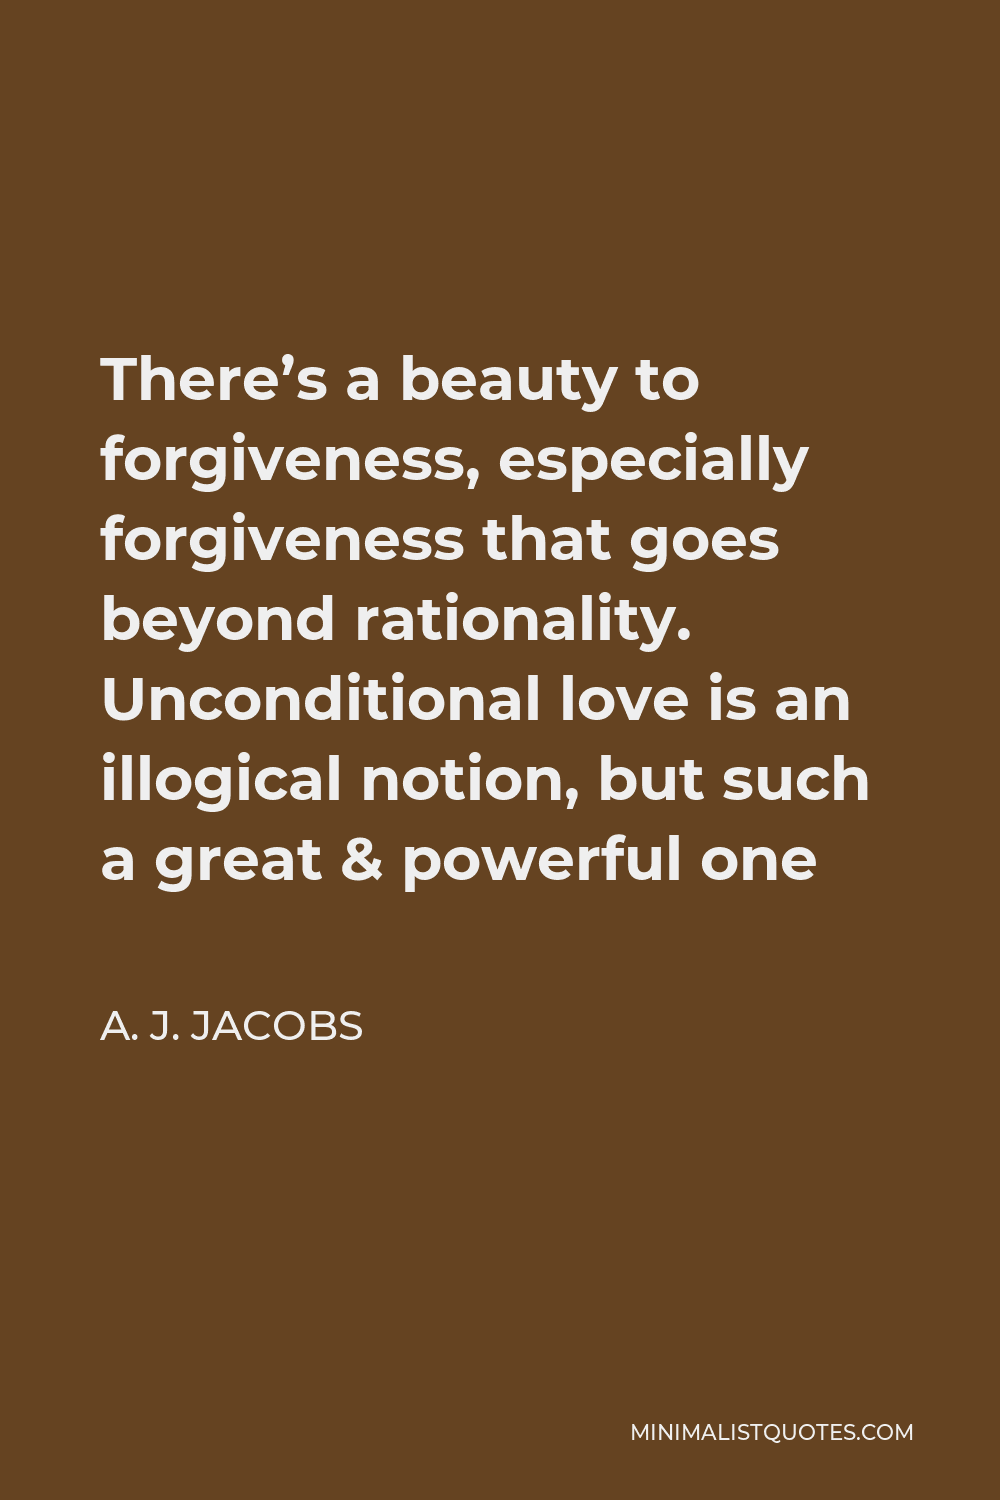 A. J. Jacobs Quote - There’s a beauty to forgiveness, especially forgiveness that goes beyond rationality. Unconditional love is an illogical notion, but such a great & powerful one